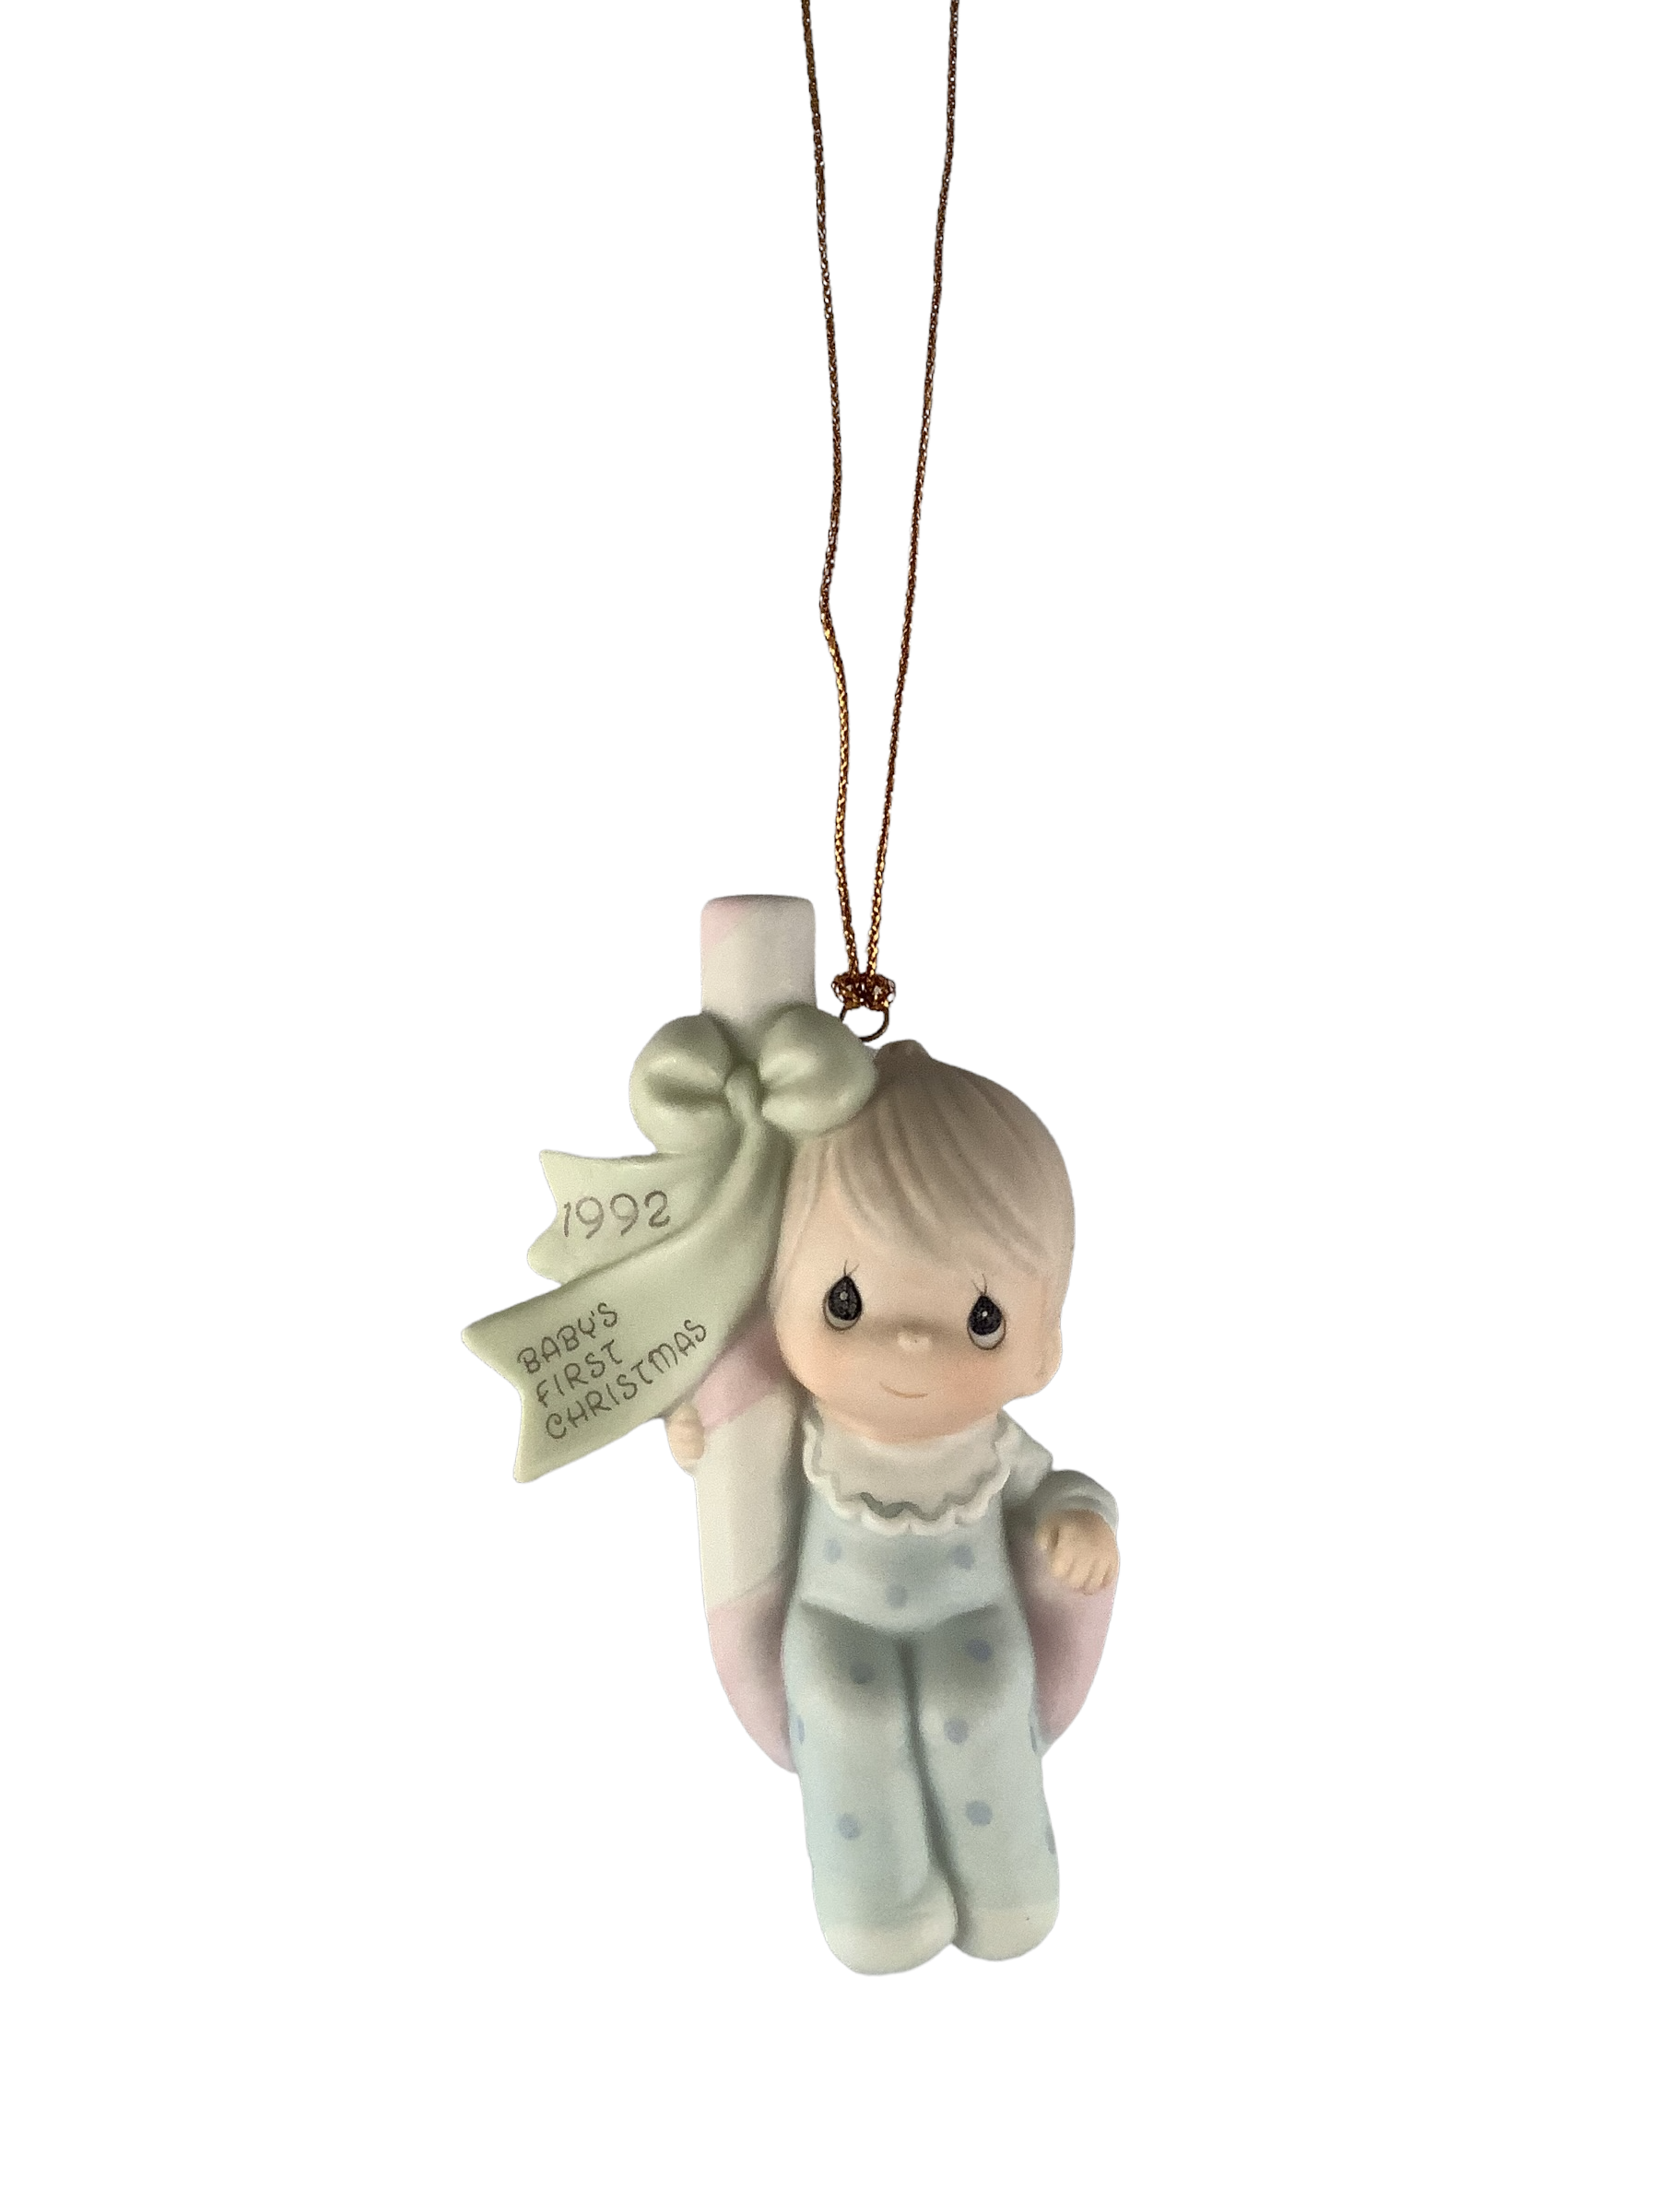 Baby's First Christmas 1992 (Boy) - Precious Moment Ornament